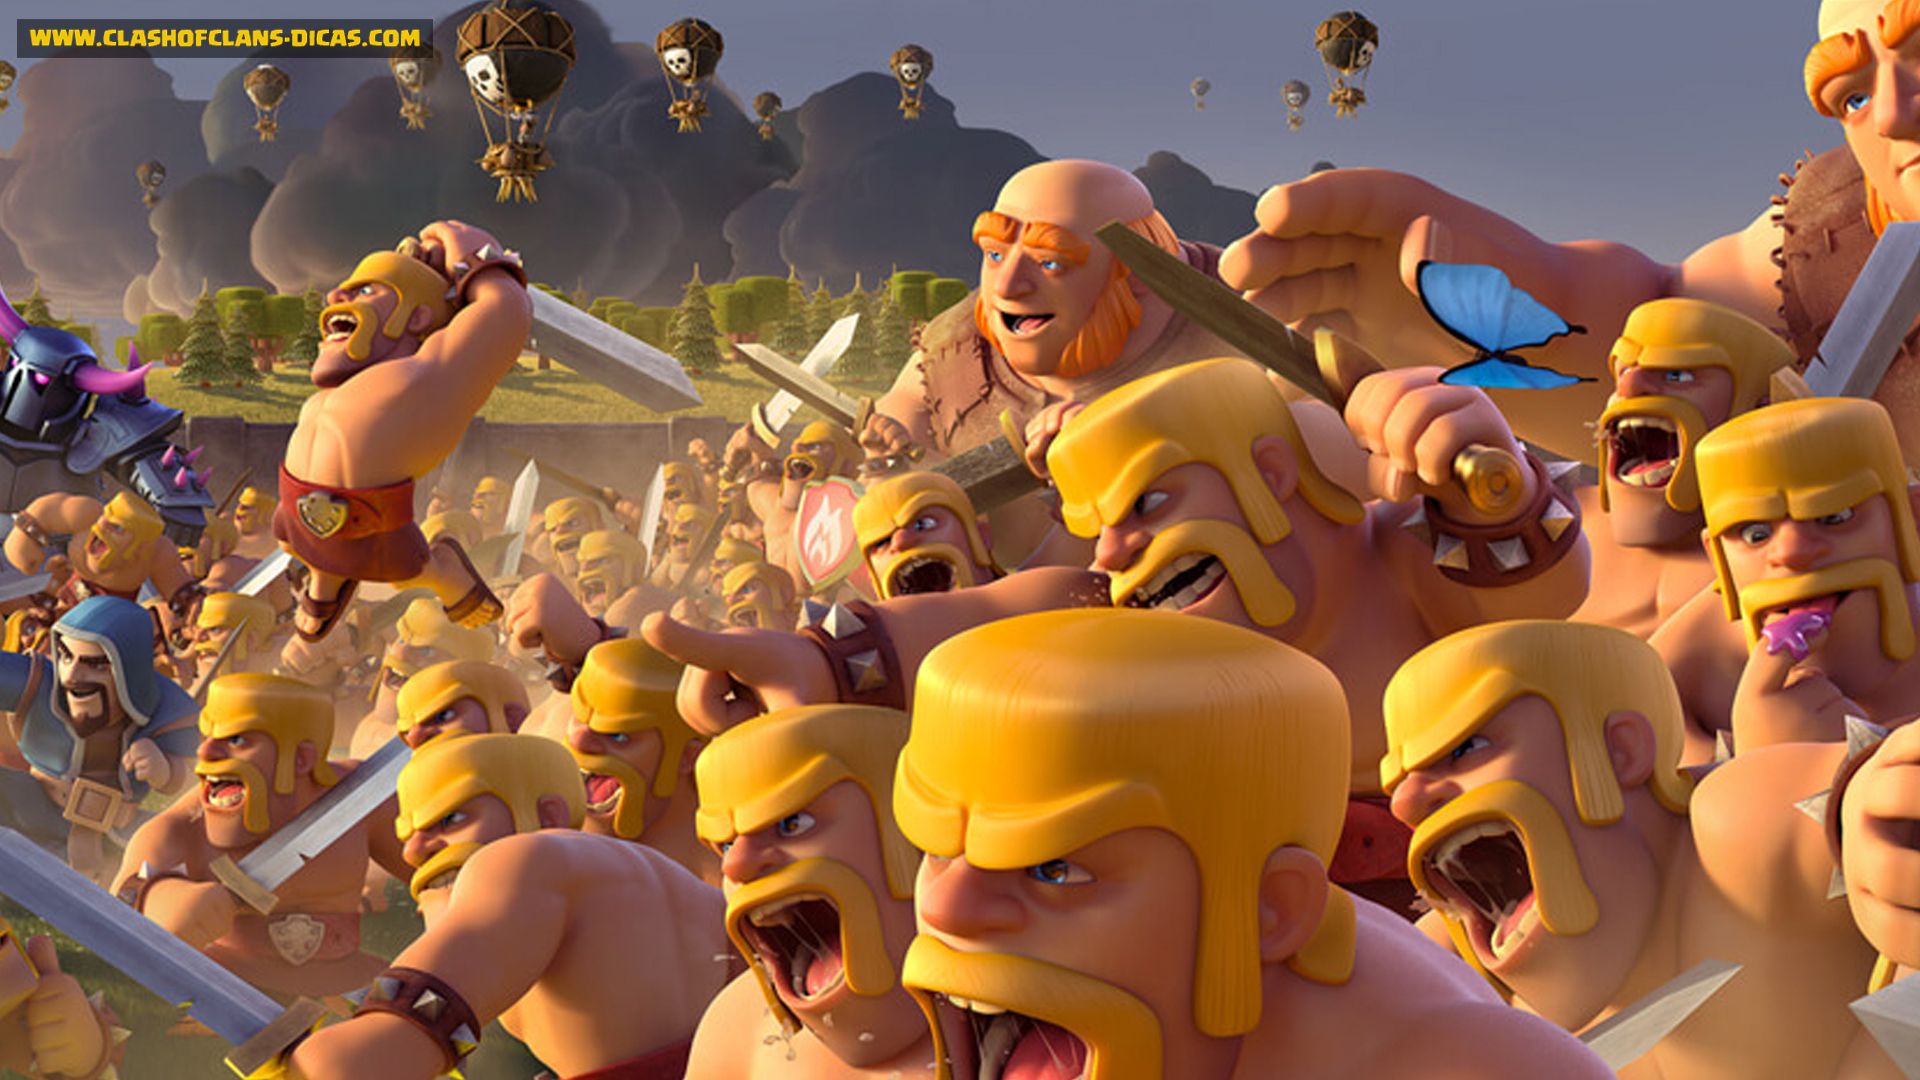 Clash of clans images wallpapers wallpapers â adorable wallpapers clash of clans wallpaper coc wallpaper image photo